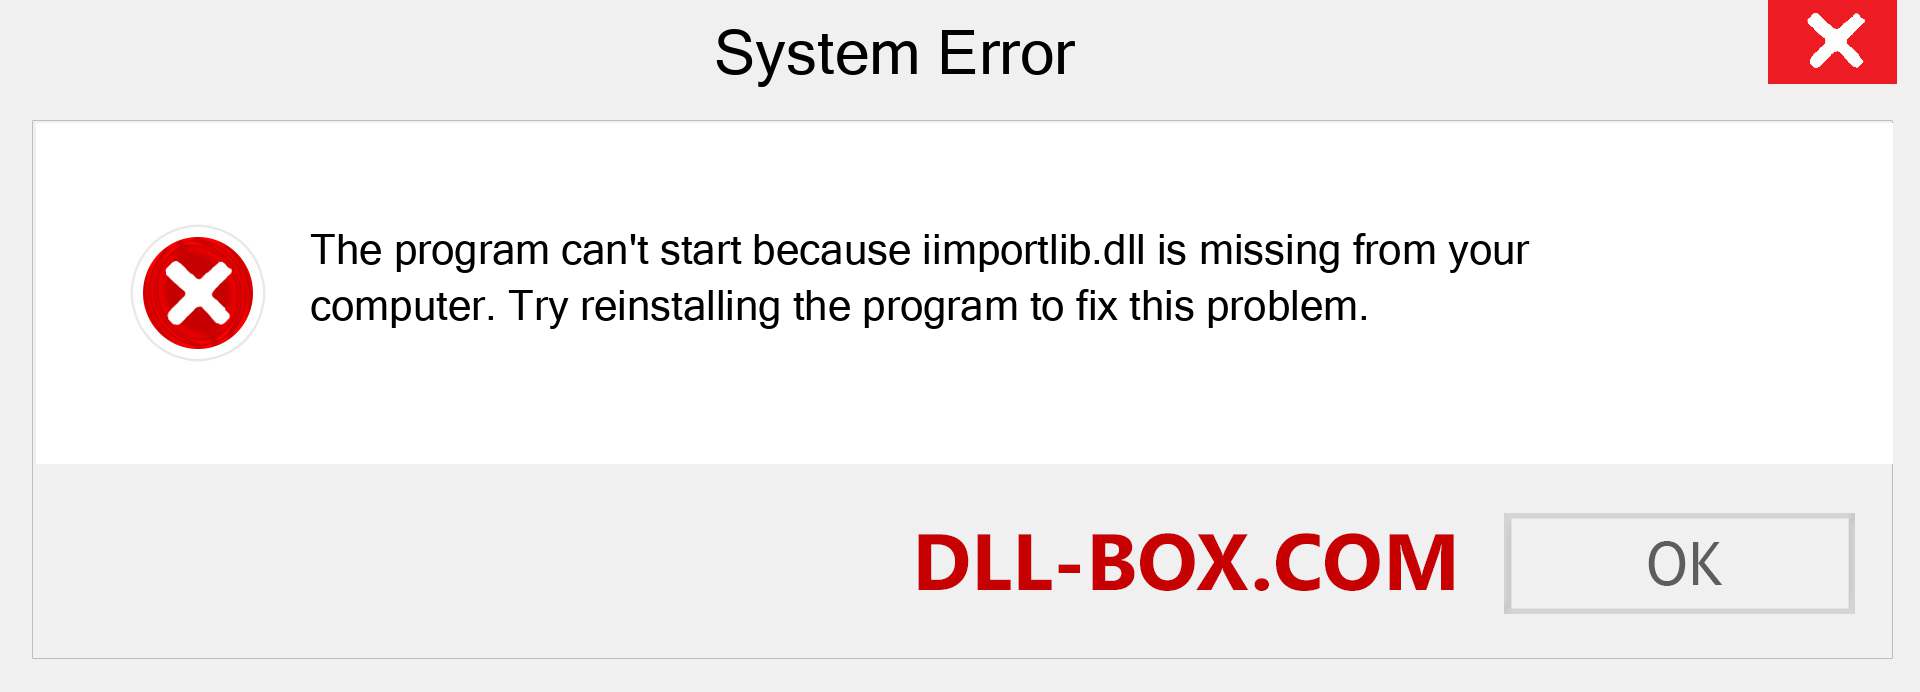  iimportlib.dll file is missing?. Download for Windows 7, 8, 10 - Fix  iimportlib dll Missing Error on Windows, photos, images